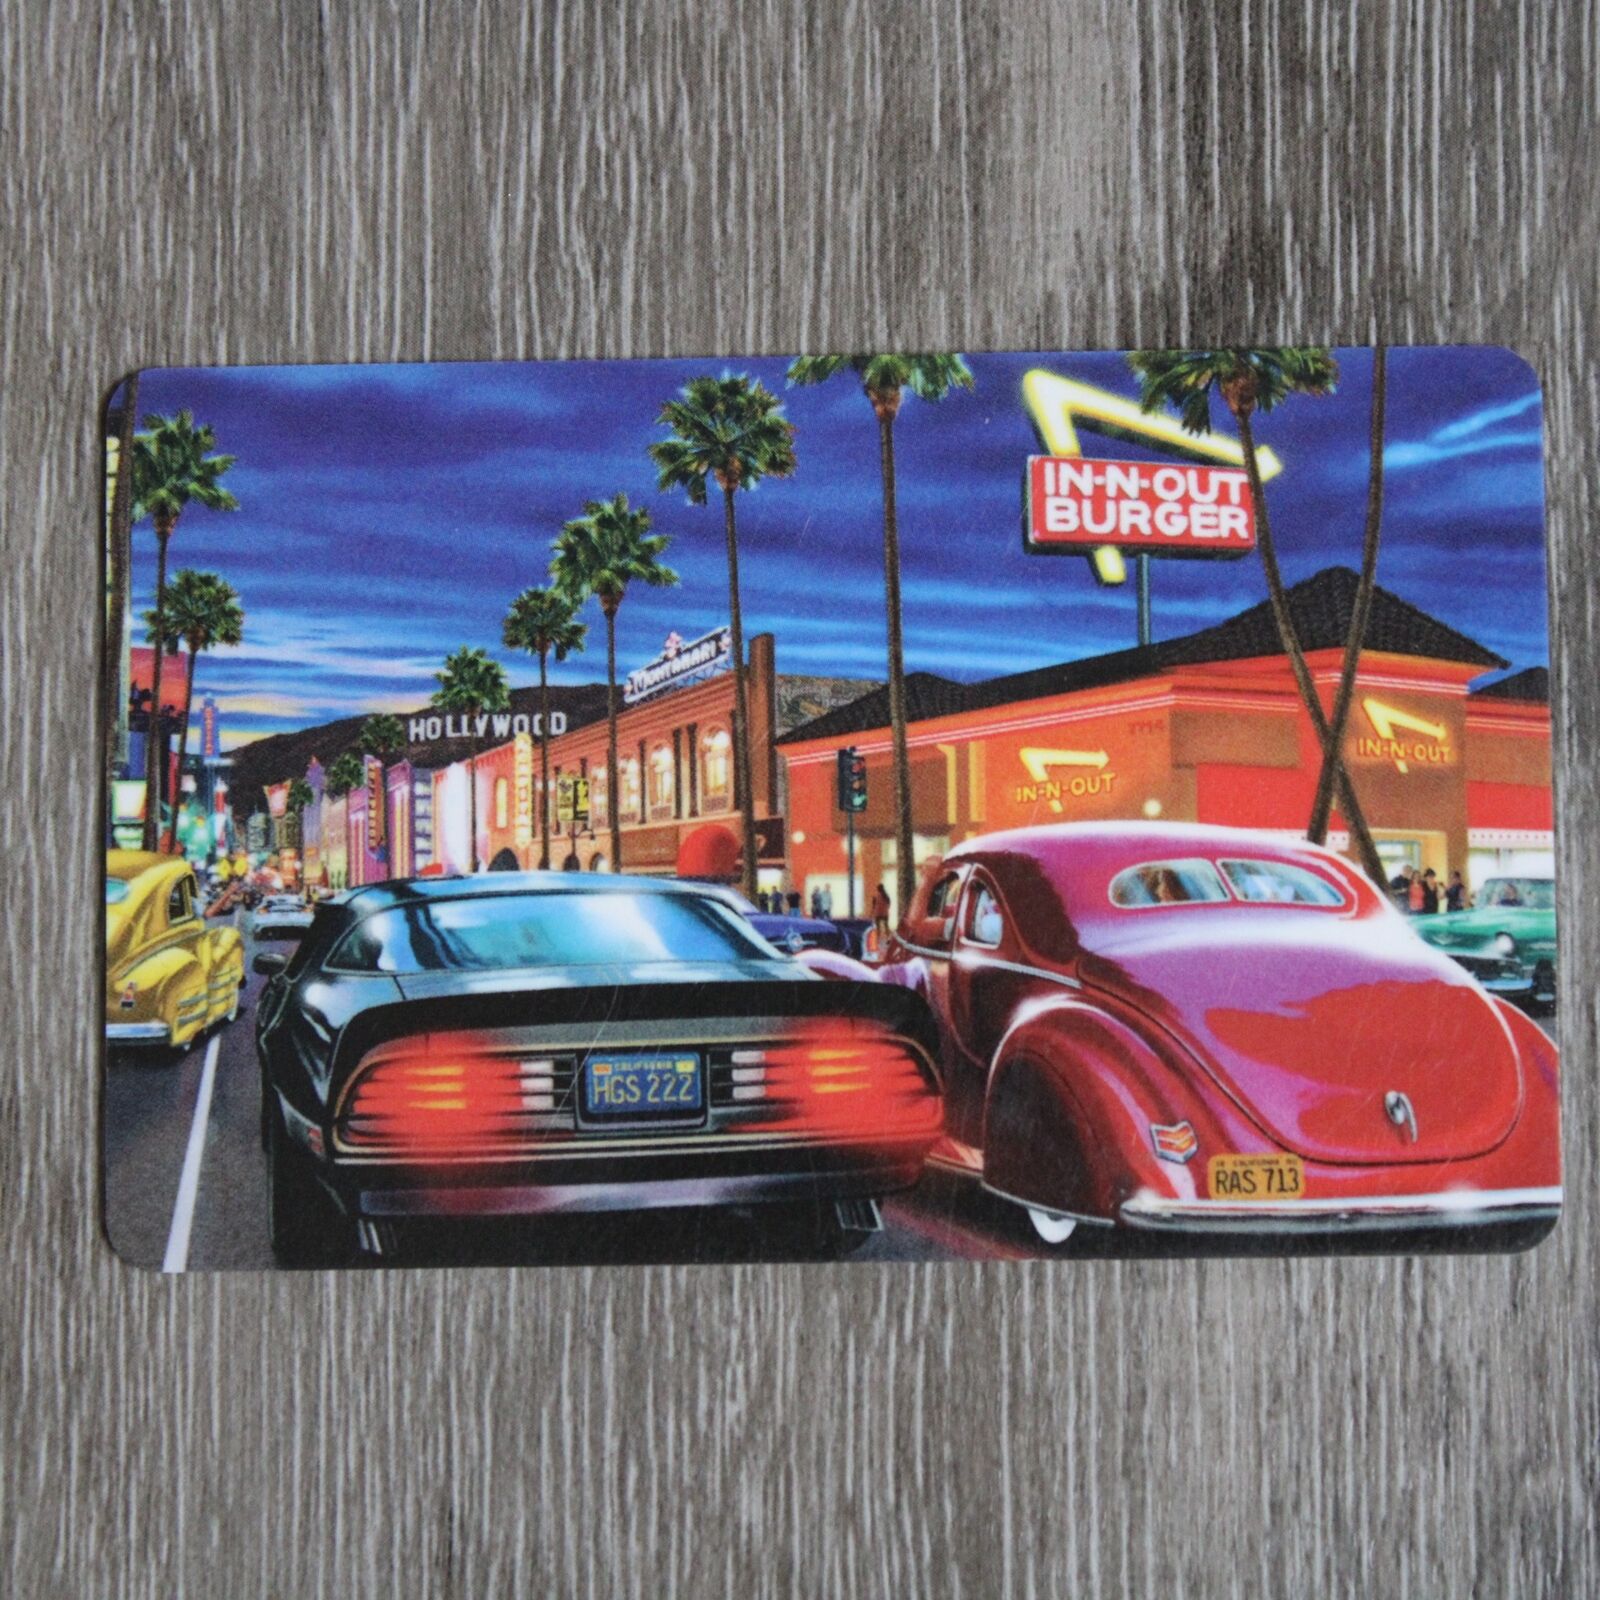 In-N-Out Burger Gift 2018 Cruising Sunset Boulevard Hollywood No Value